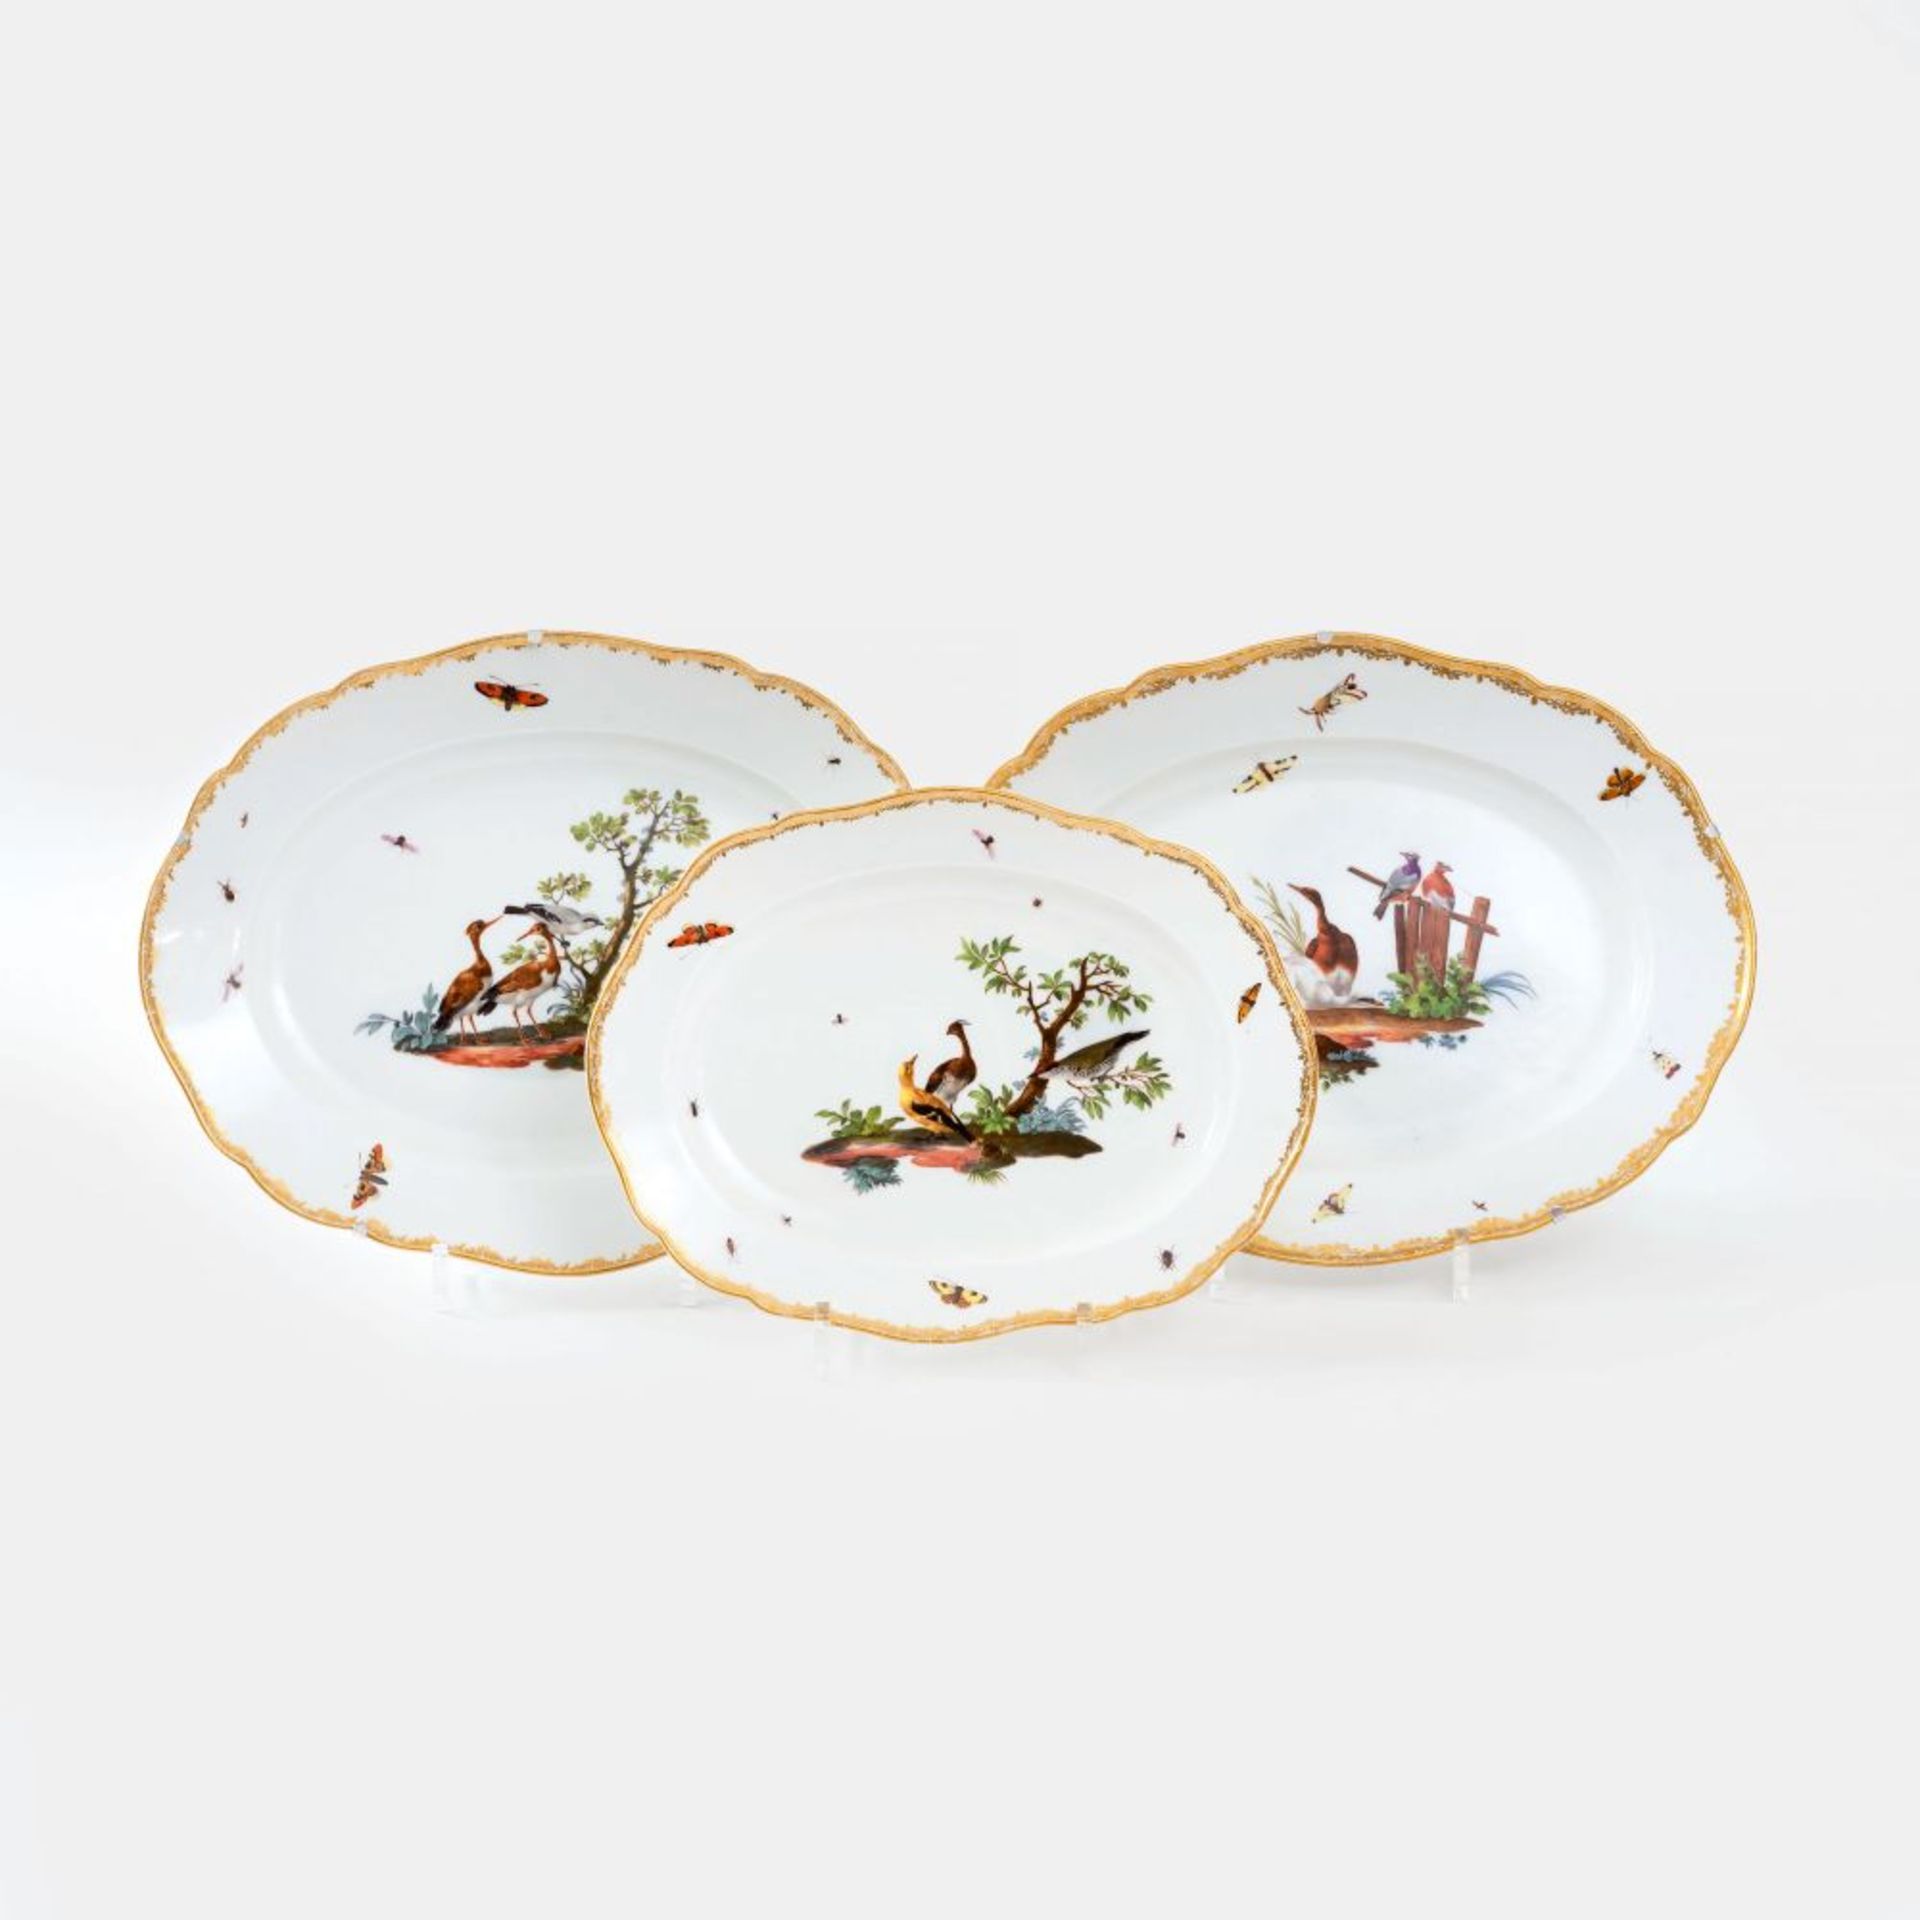 A Set of 4 Dishes with Bird Painting and Insects.